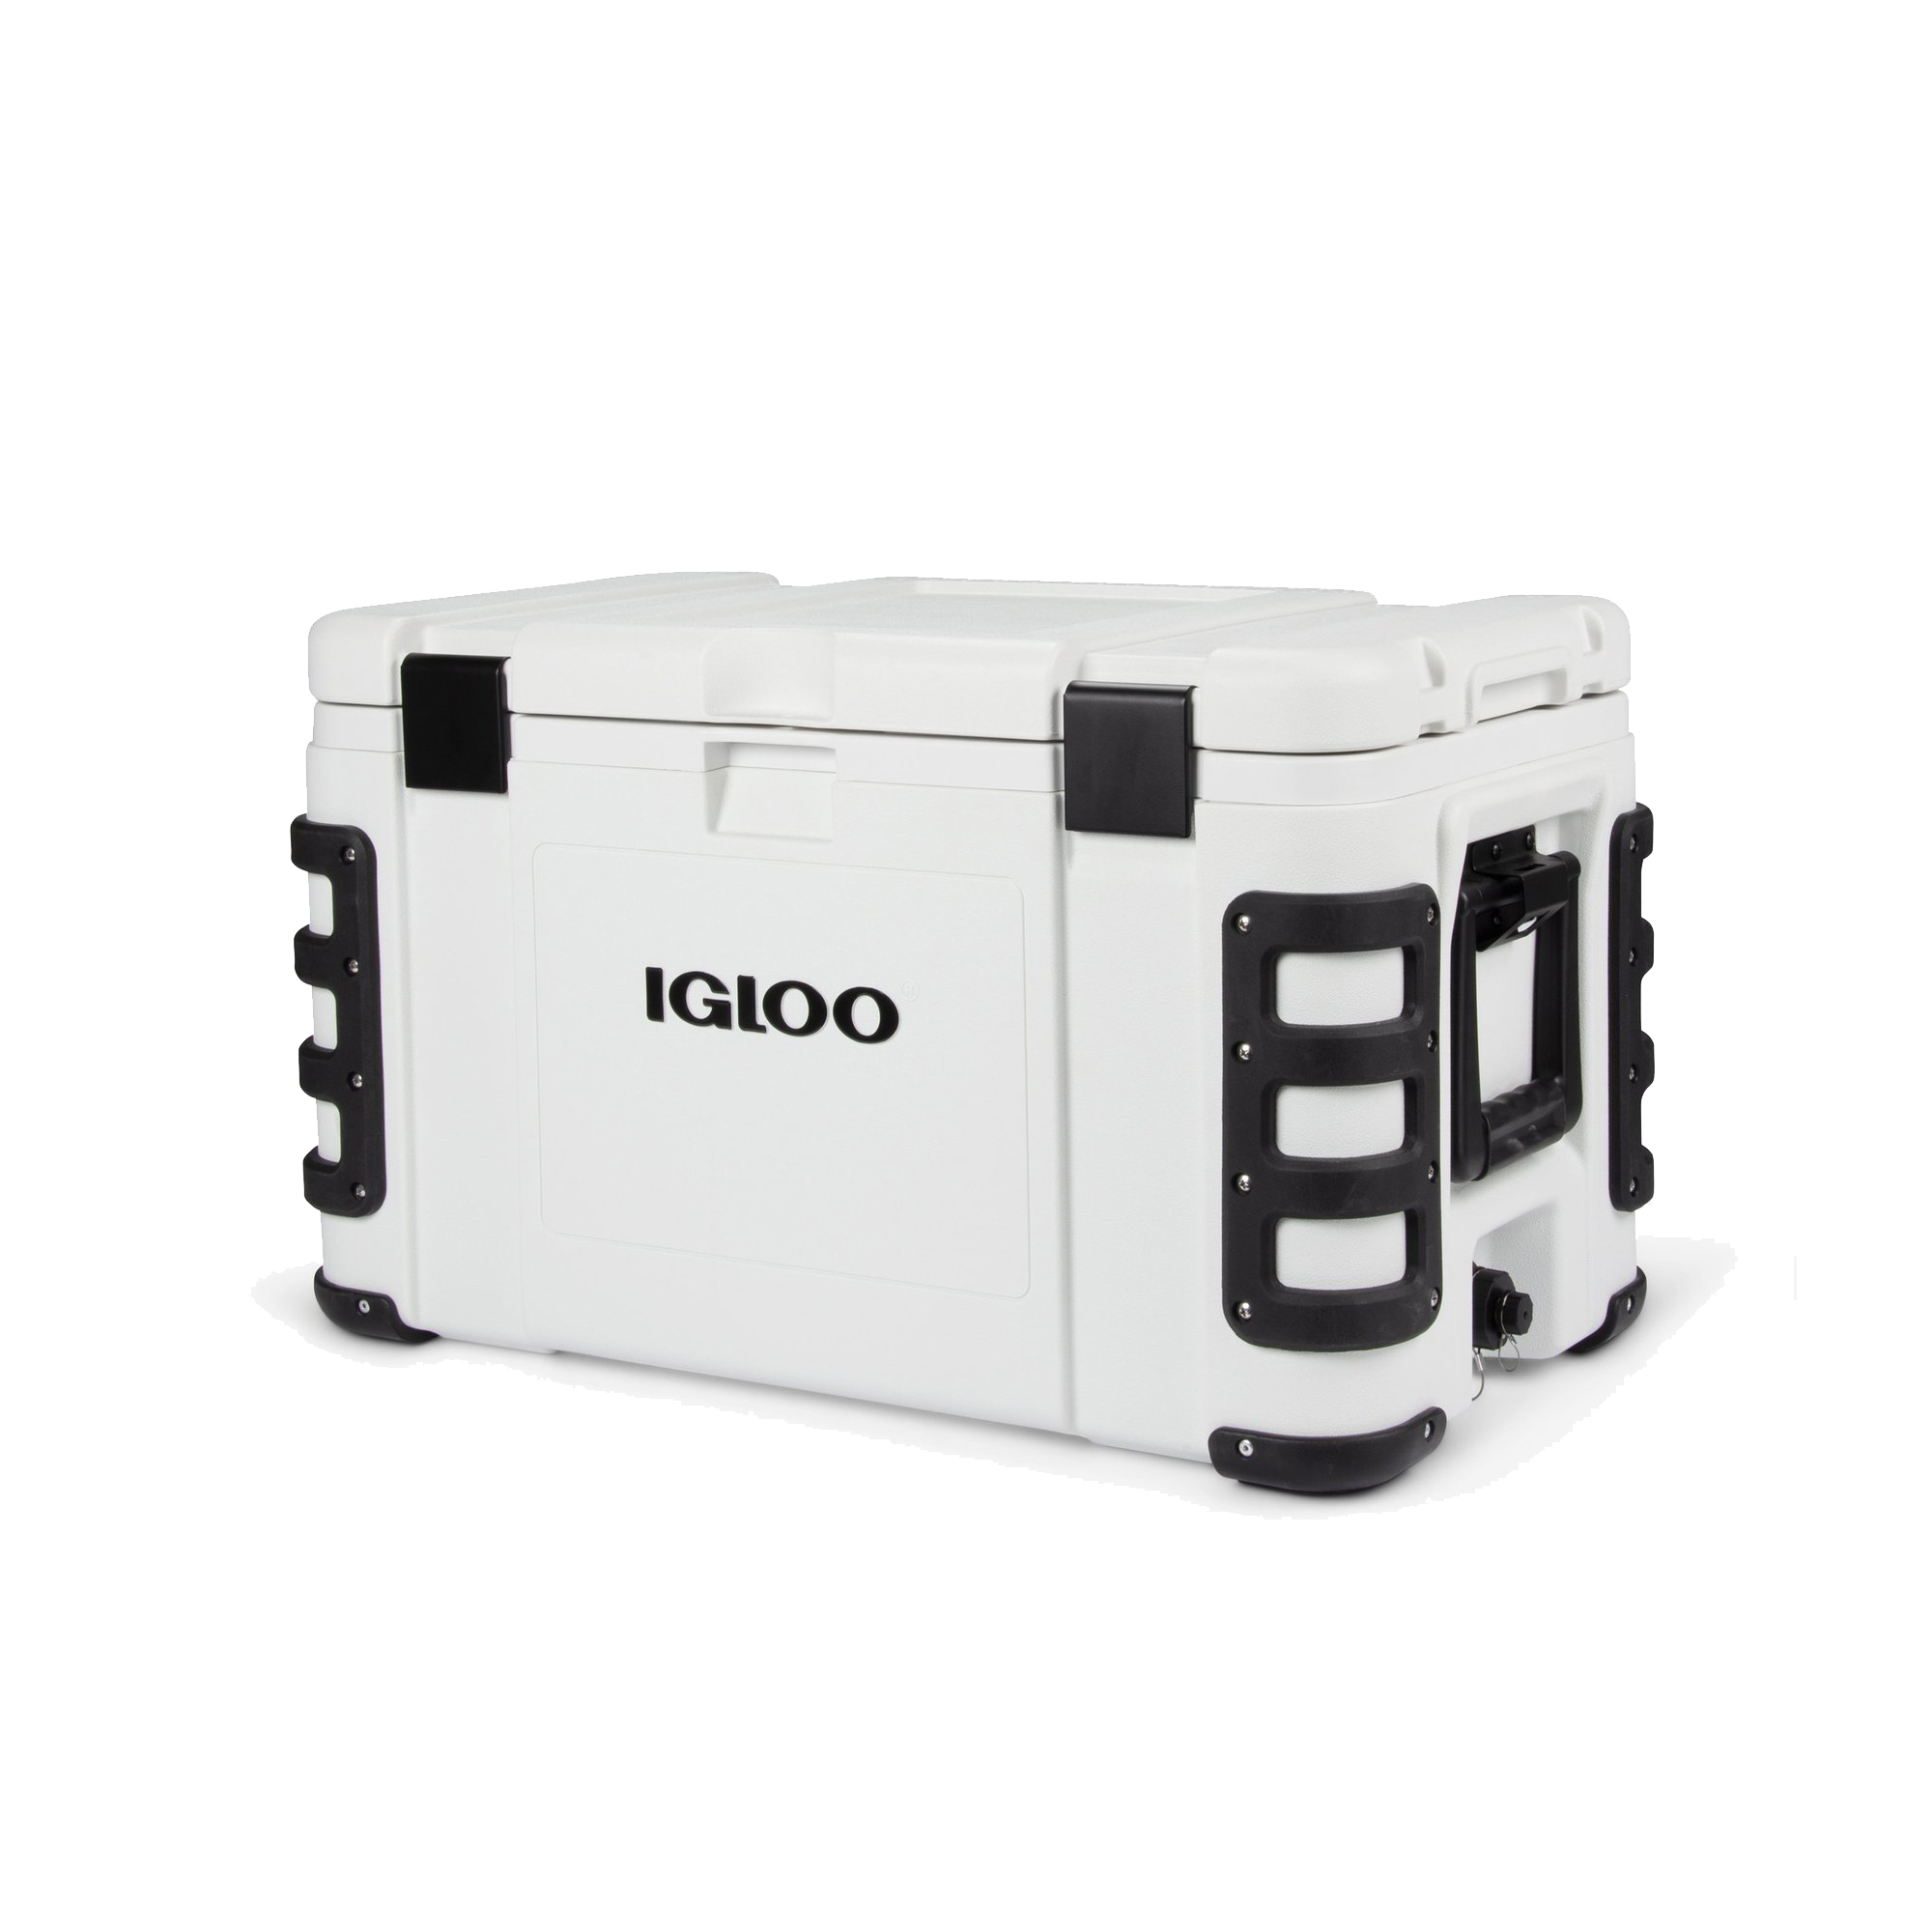 Igloo 50 qt. Hard Sided Ice Chest Cooler, White - image 1 of 8